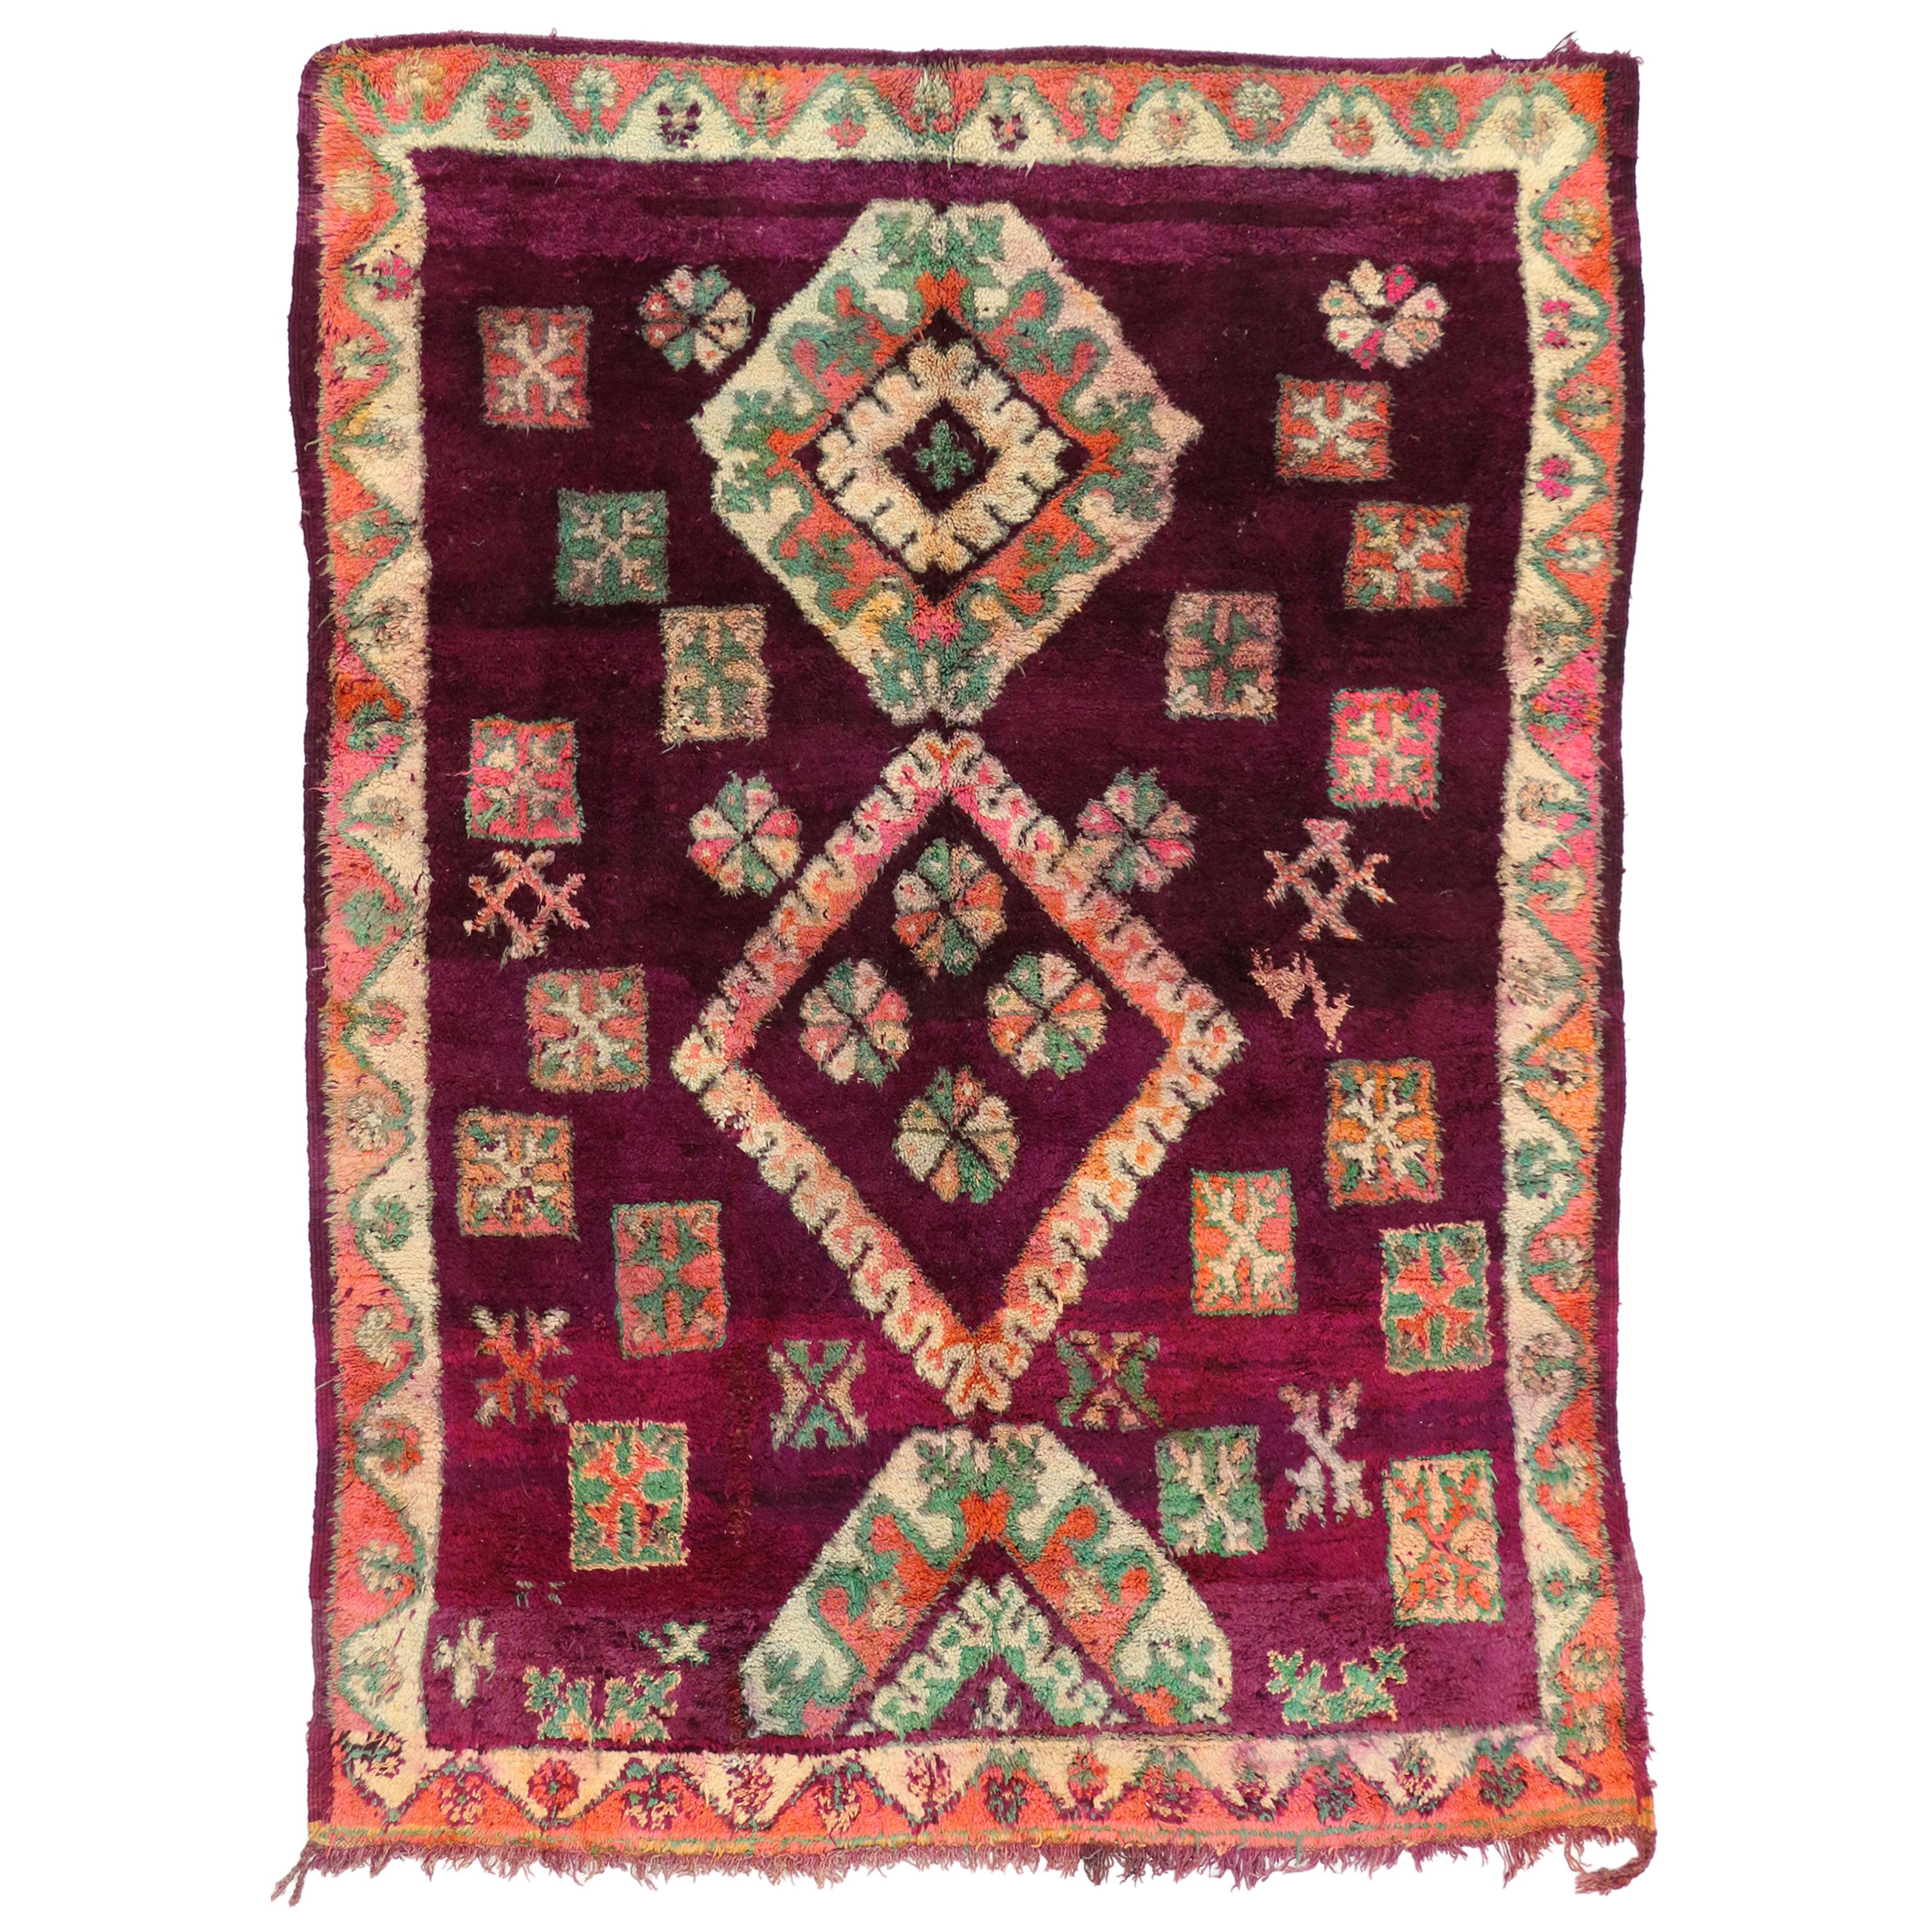 Vintage Moroccan Boujad Rug with Tribal Style, Colorful Moroccan Berber Carpet For Sale